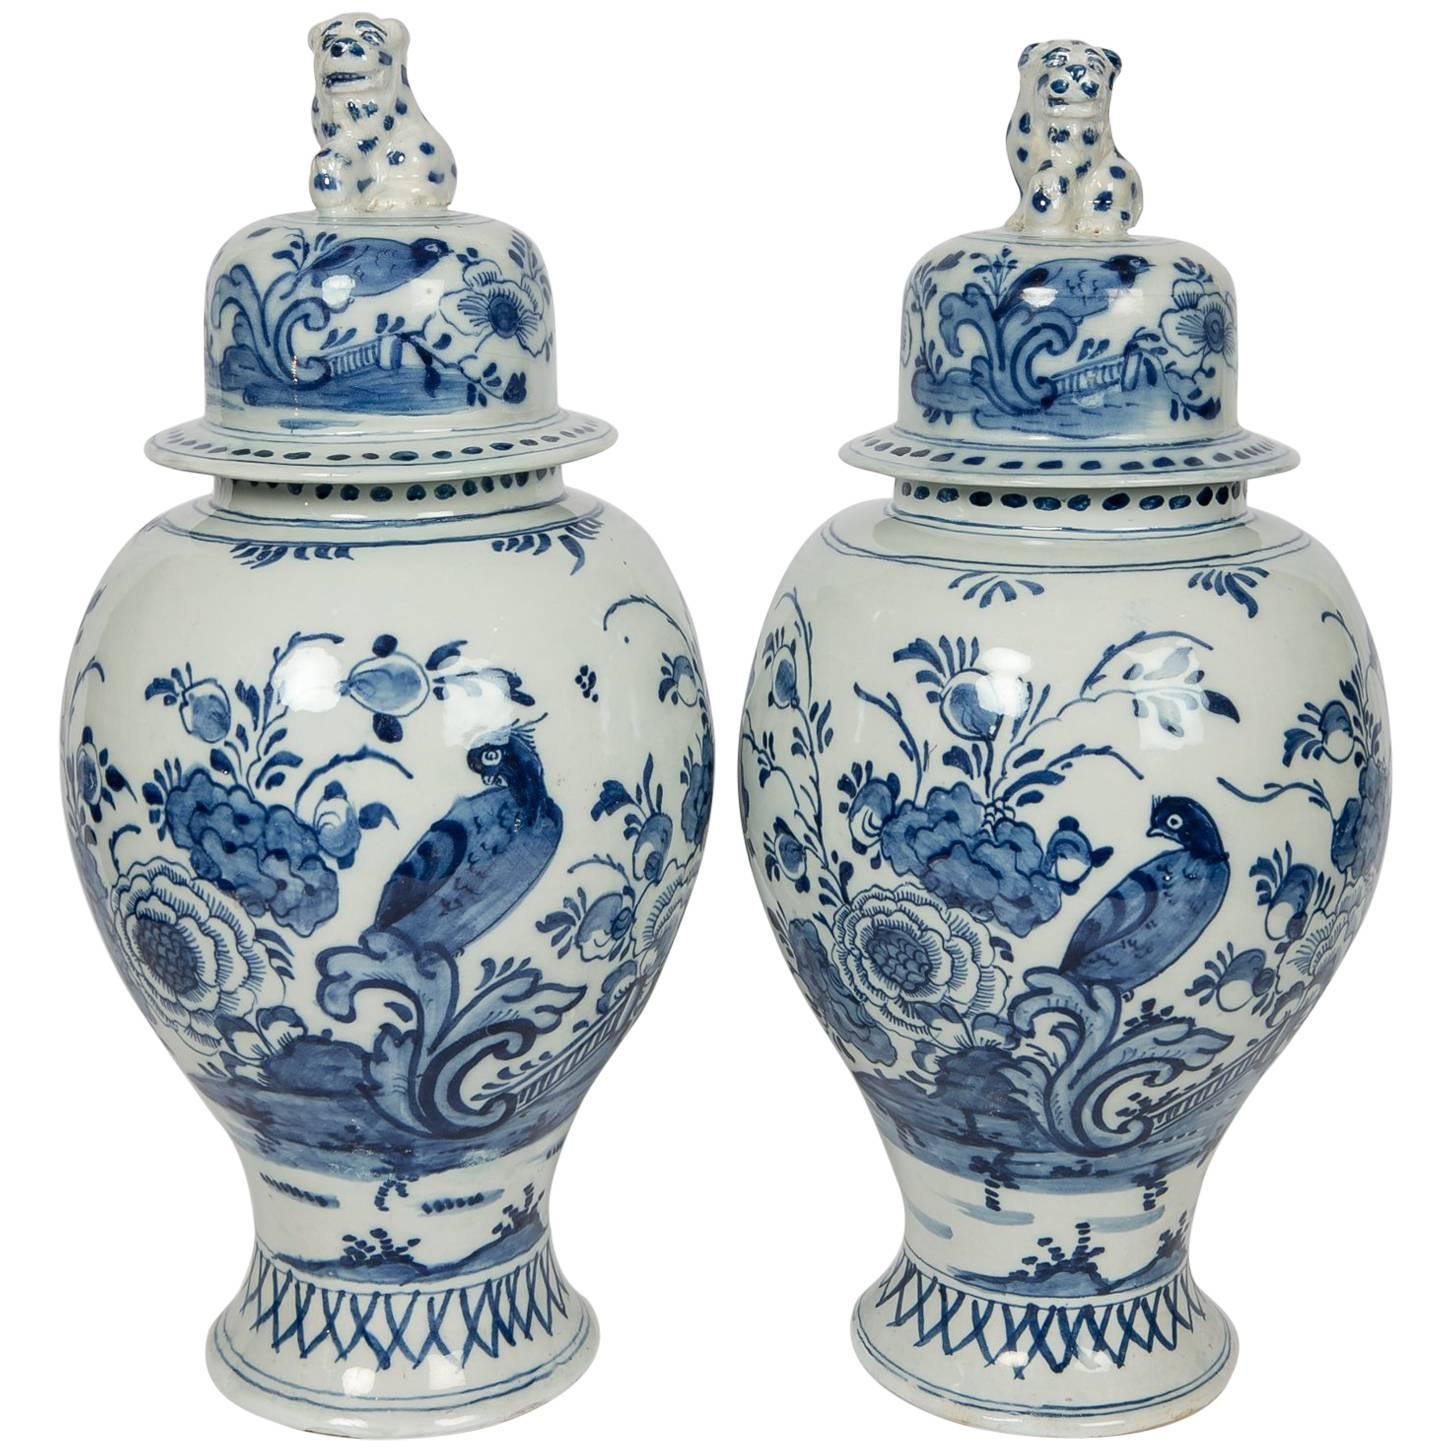 Large Blue and White Delft Mantle Jars Round with Leopard Finials IN STOCK